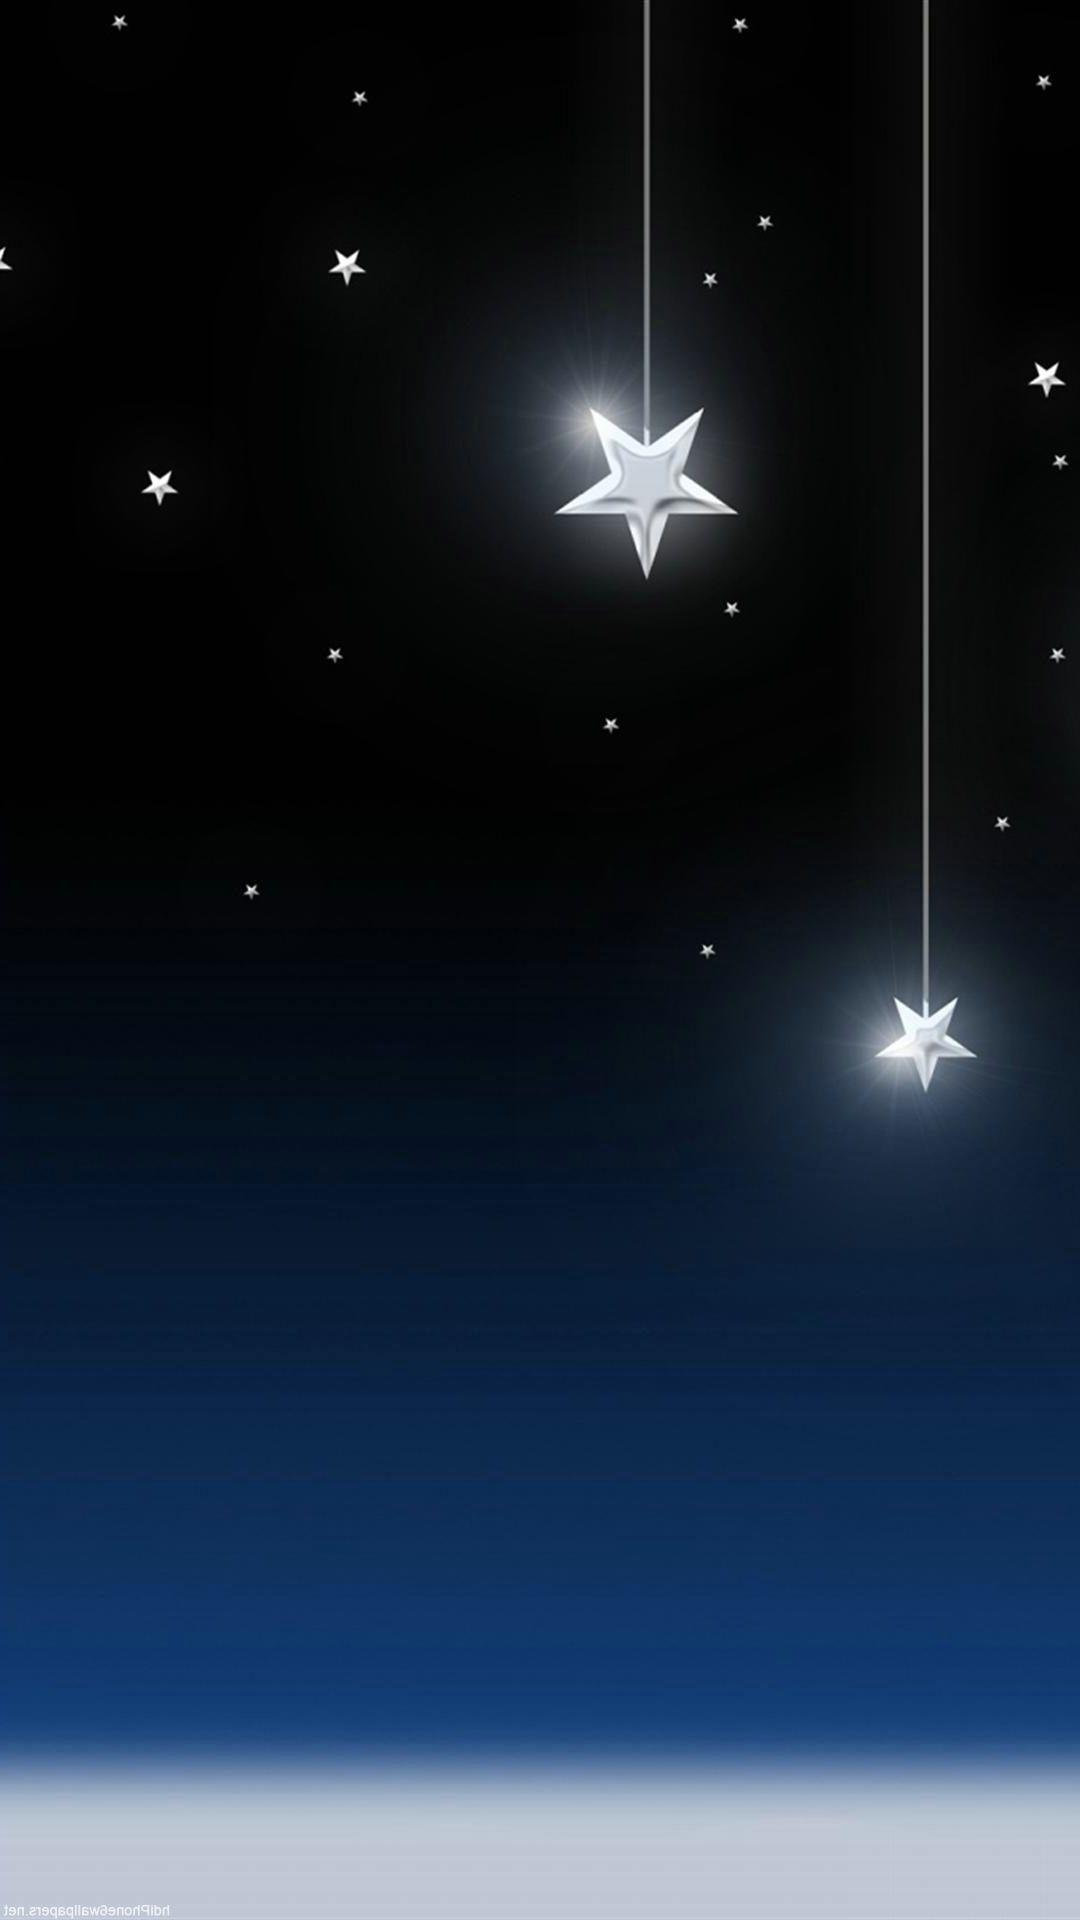 Stars Wallpaper For Android iPhone Wallpaper. Star wallpaper, Android wallpaper, Cellphone wallpaper